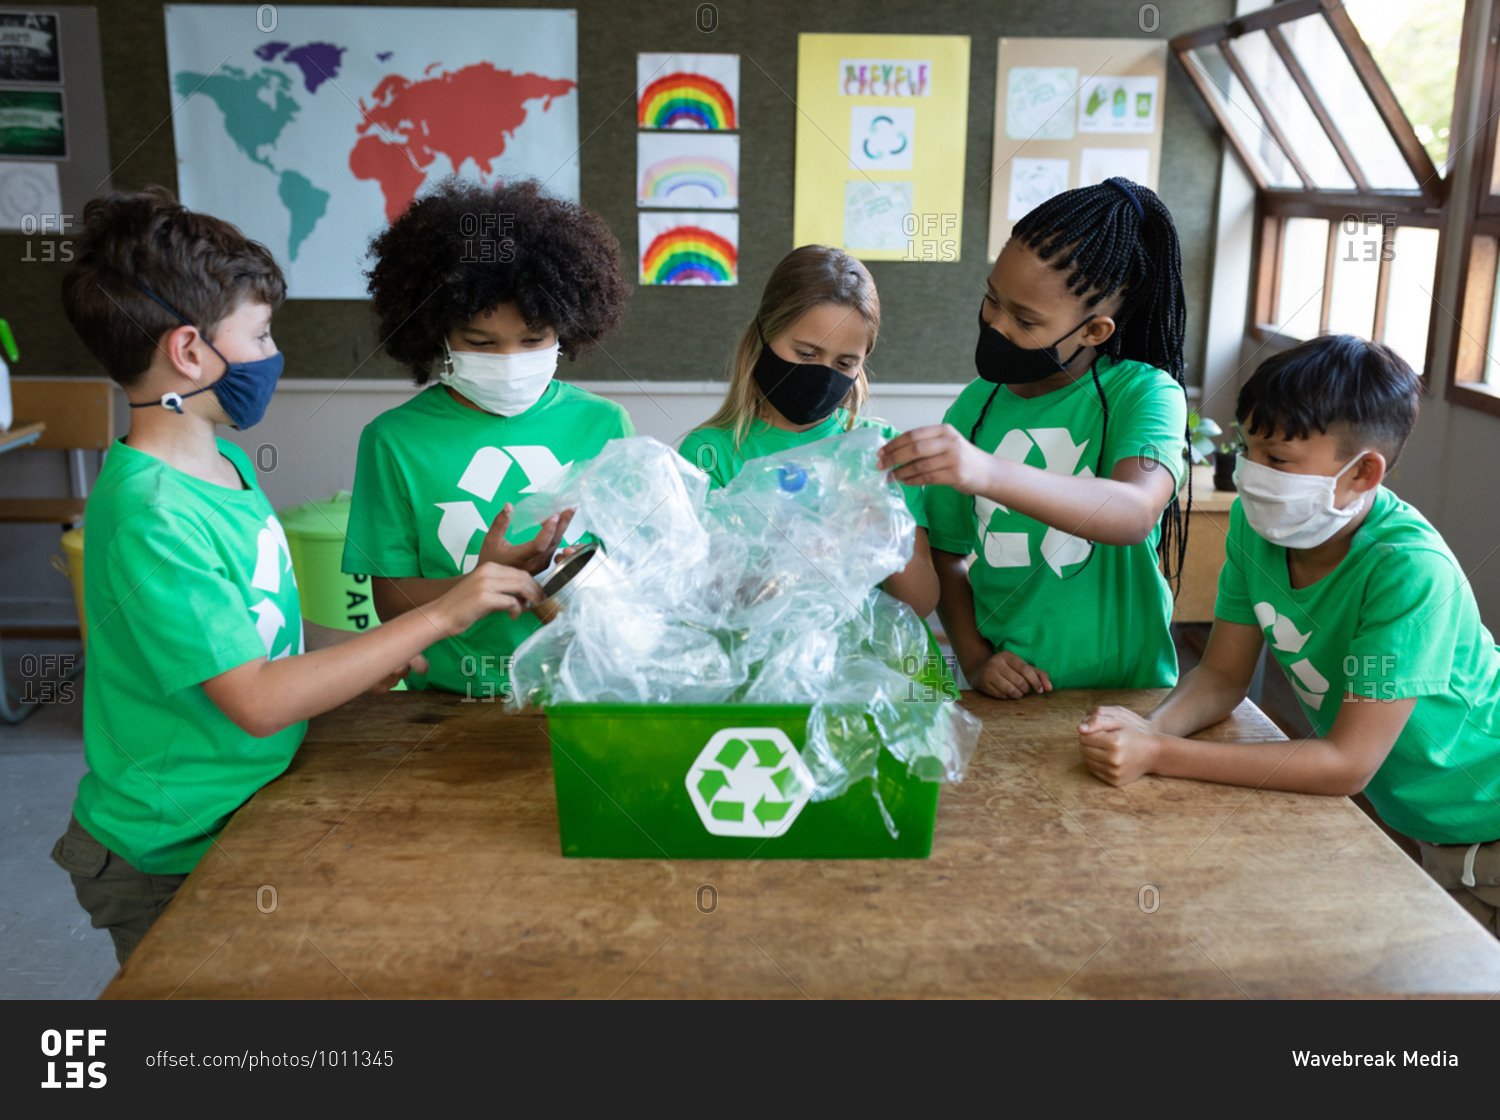 Group of multi ethnic kids wearing face masks holding plastic items in class at school. Primary education social distancing health safety during Covid19 Coronavirus pandemic.